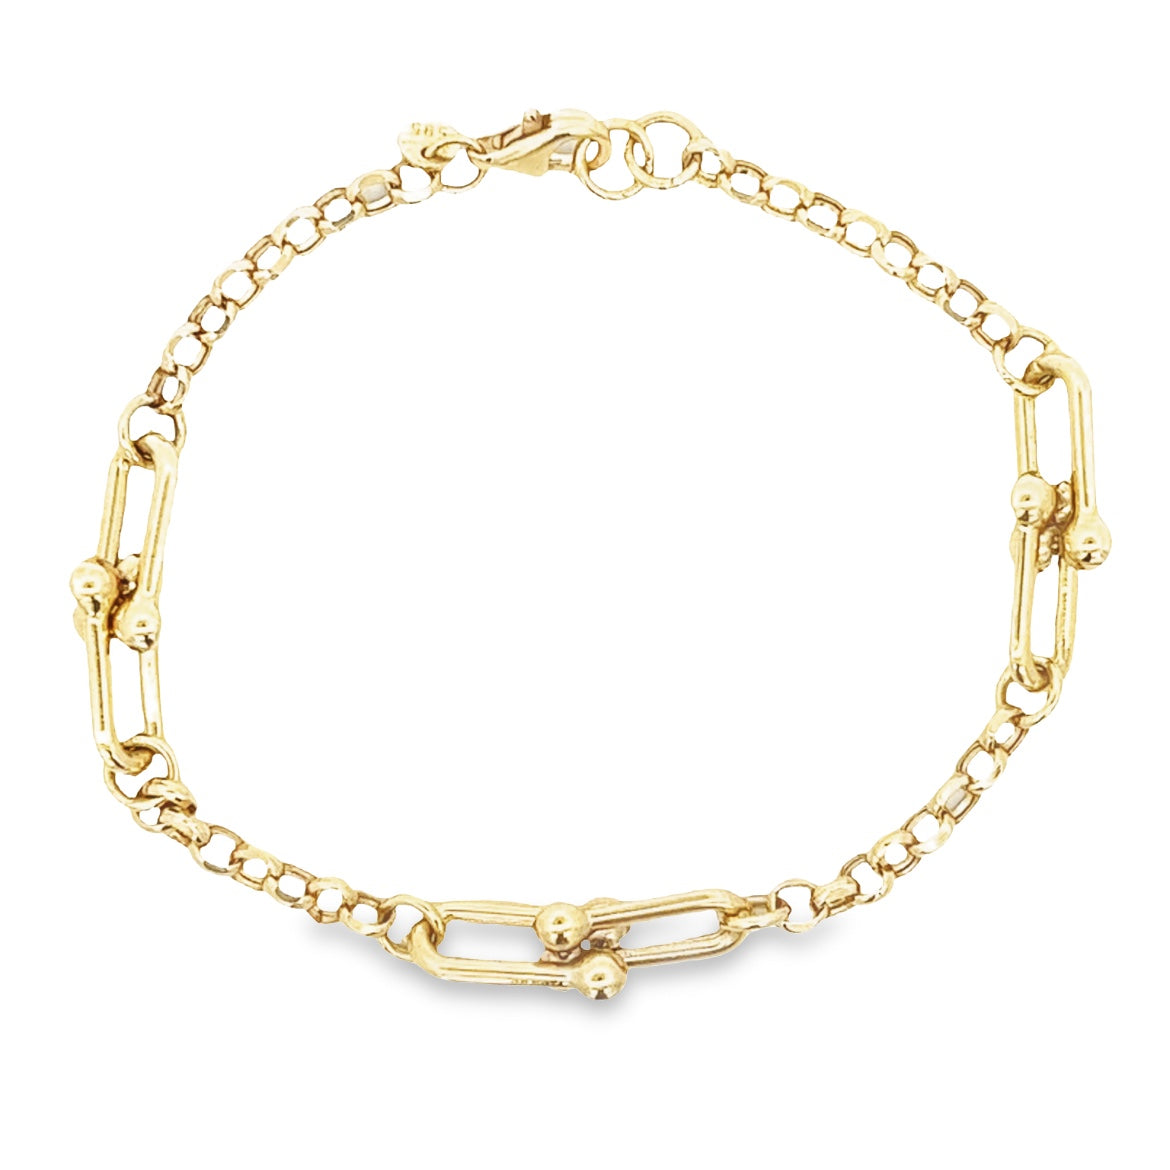 14K GOLD LINK BRACELET WITH SMALL LINK CHAIN